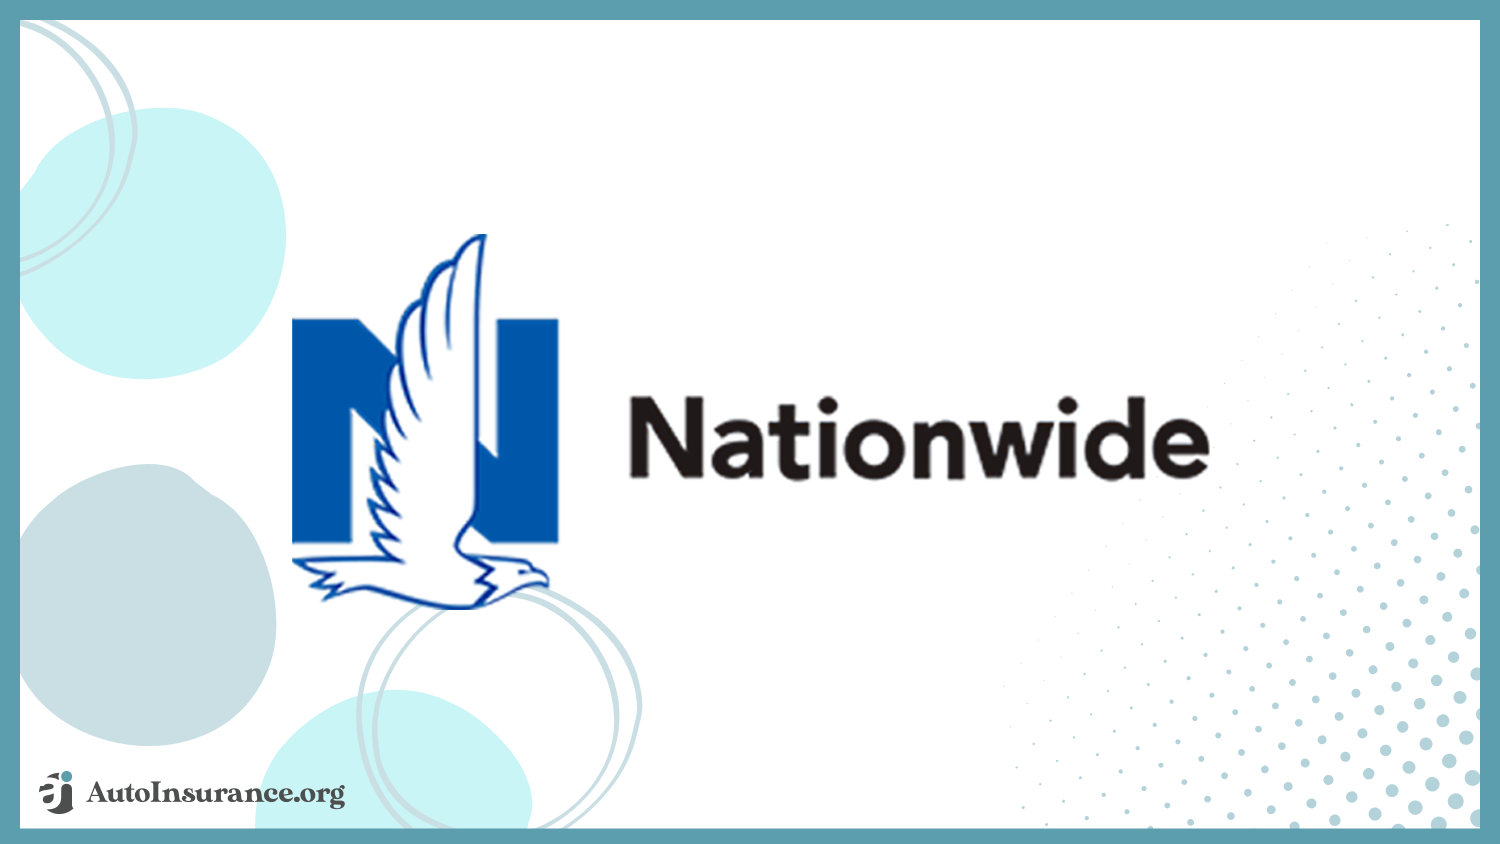 Nationwide: cheap auto insurance for low-income families